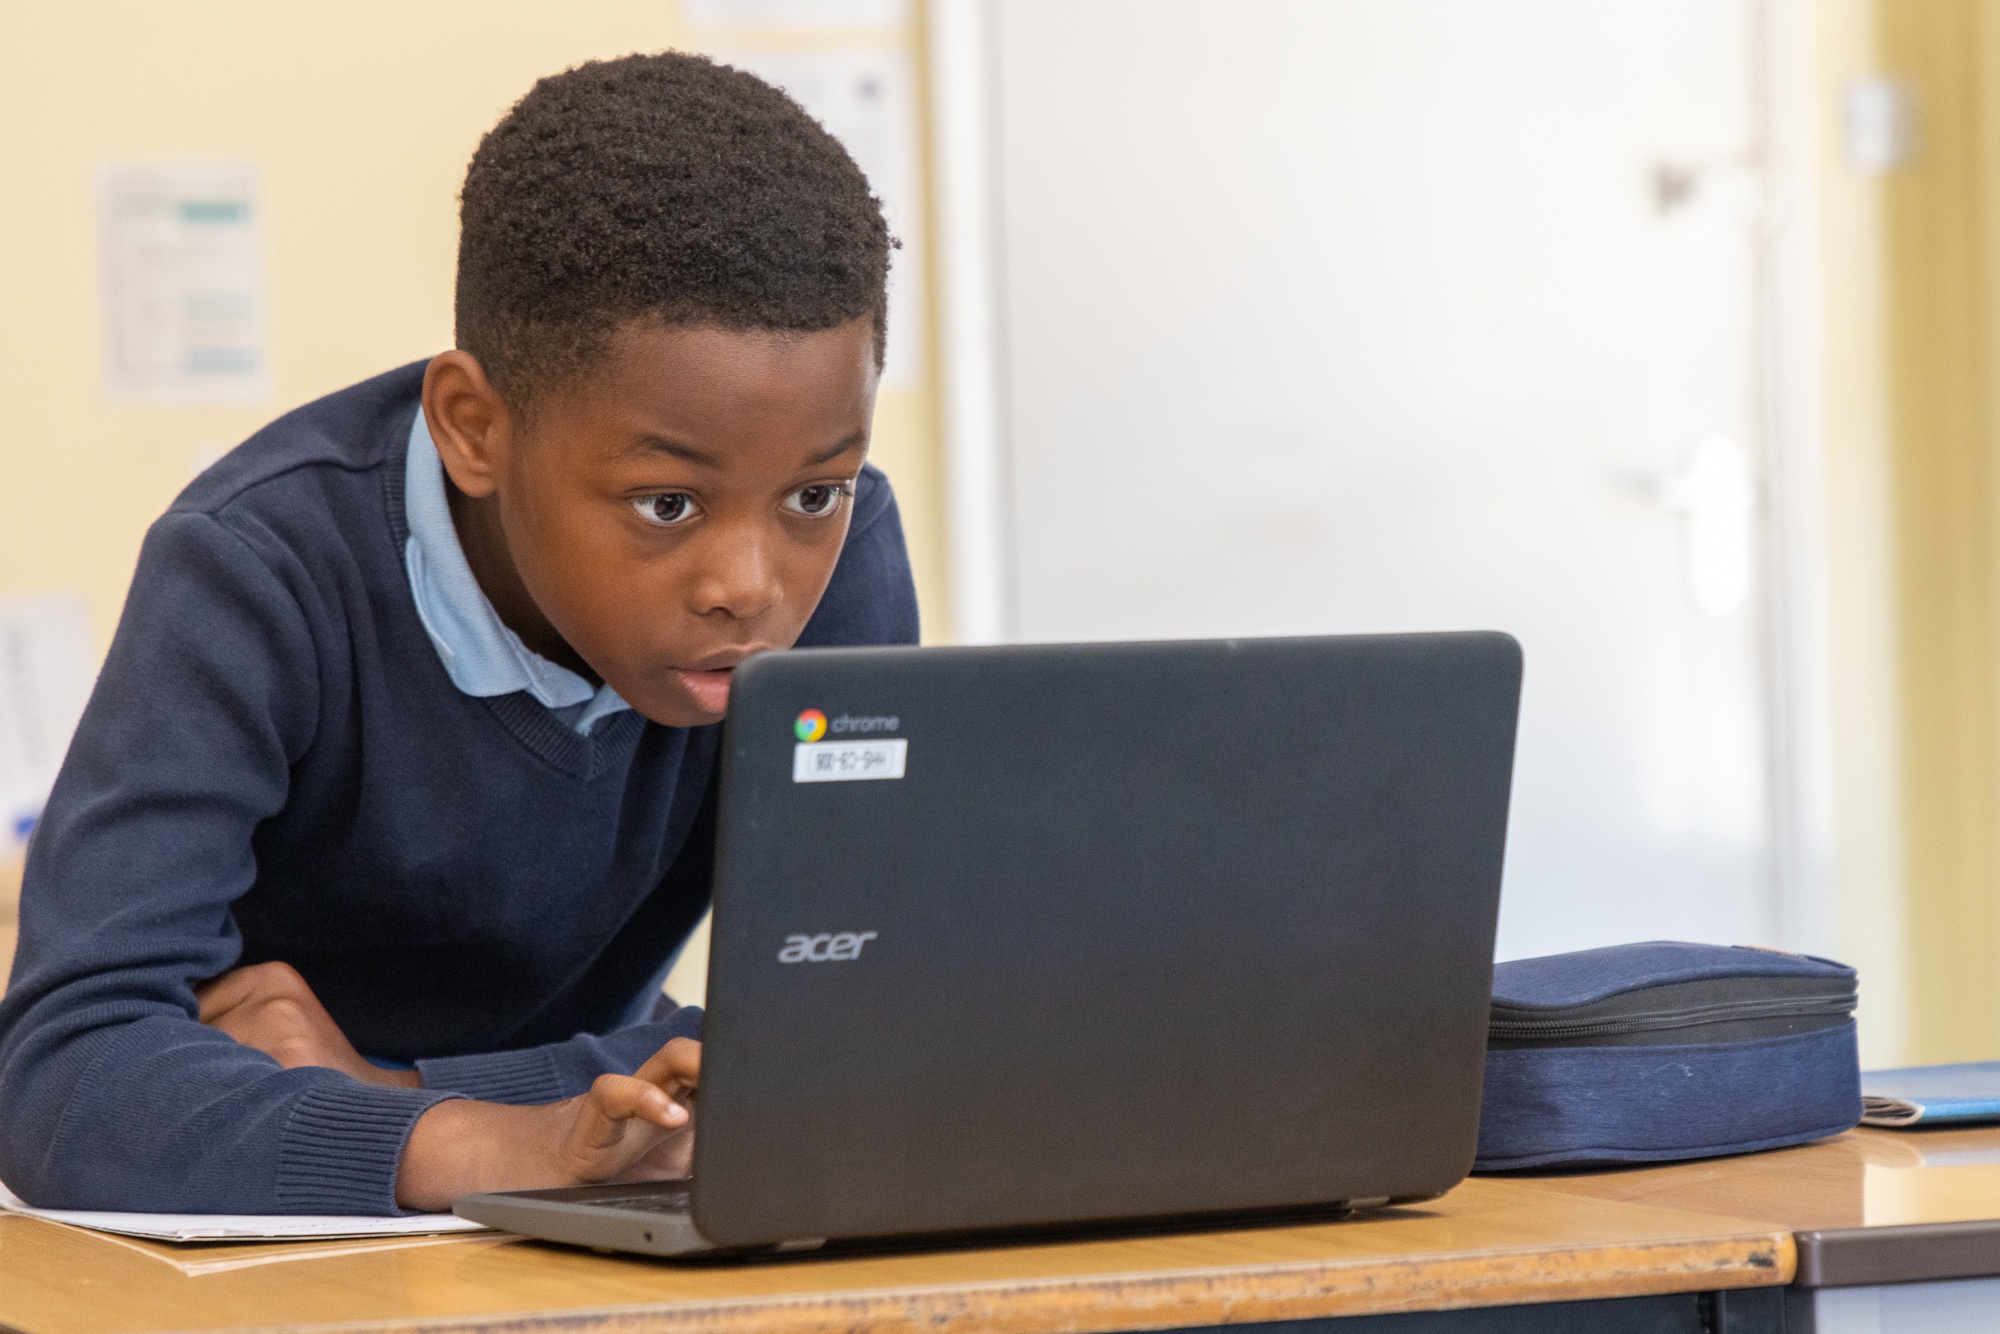 A child looking at the laptop computer